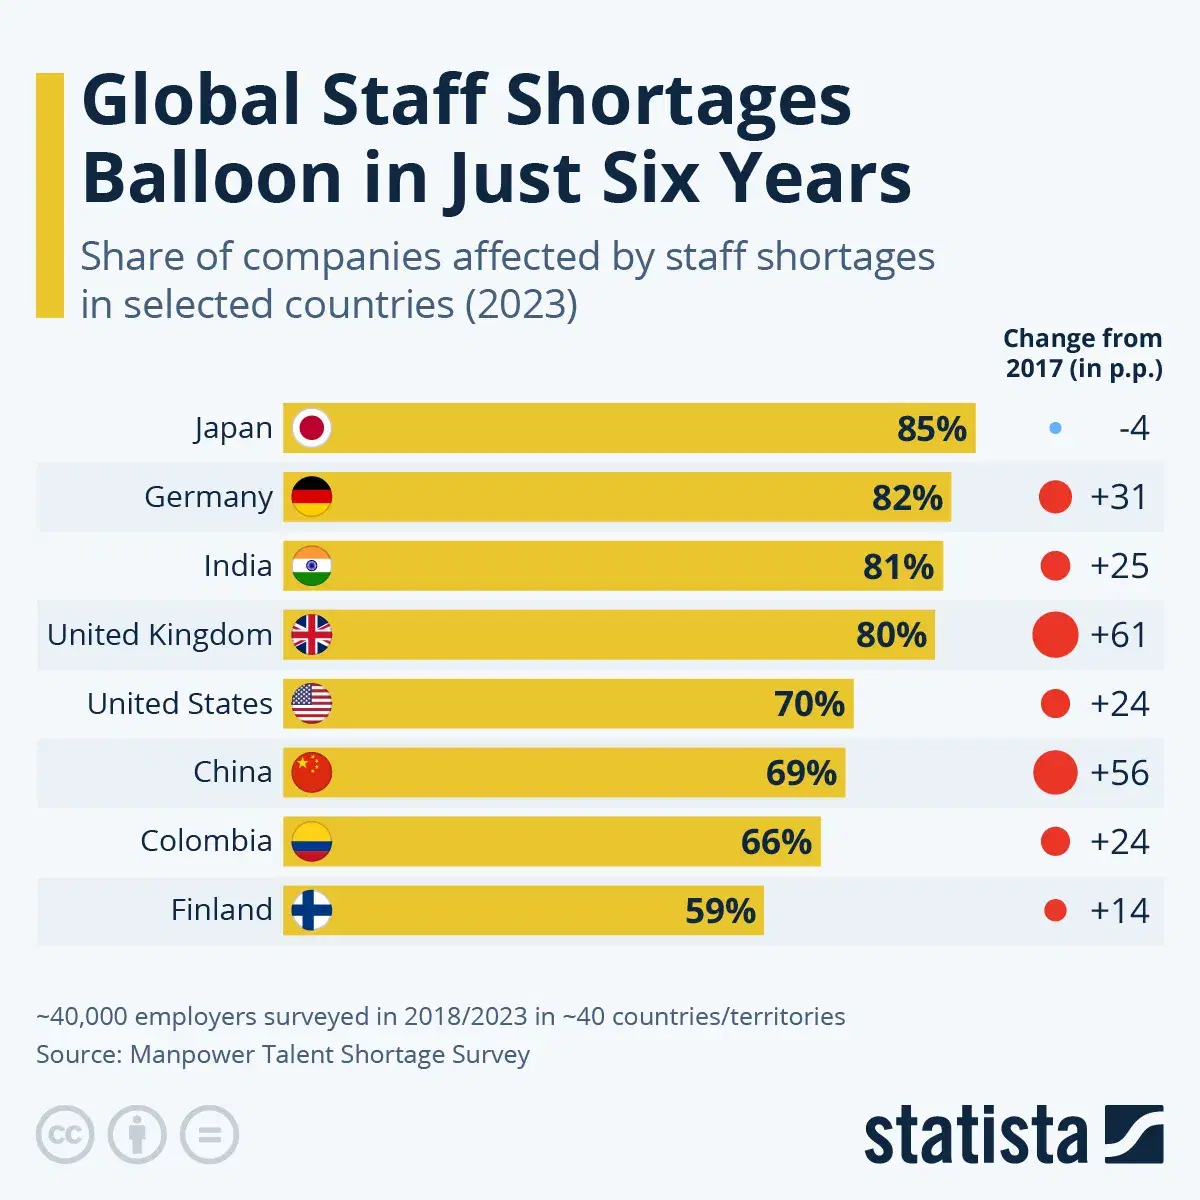 Global Staff Shortages Balloon in Just Six Years